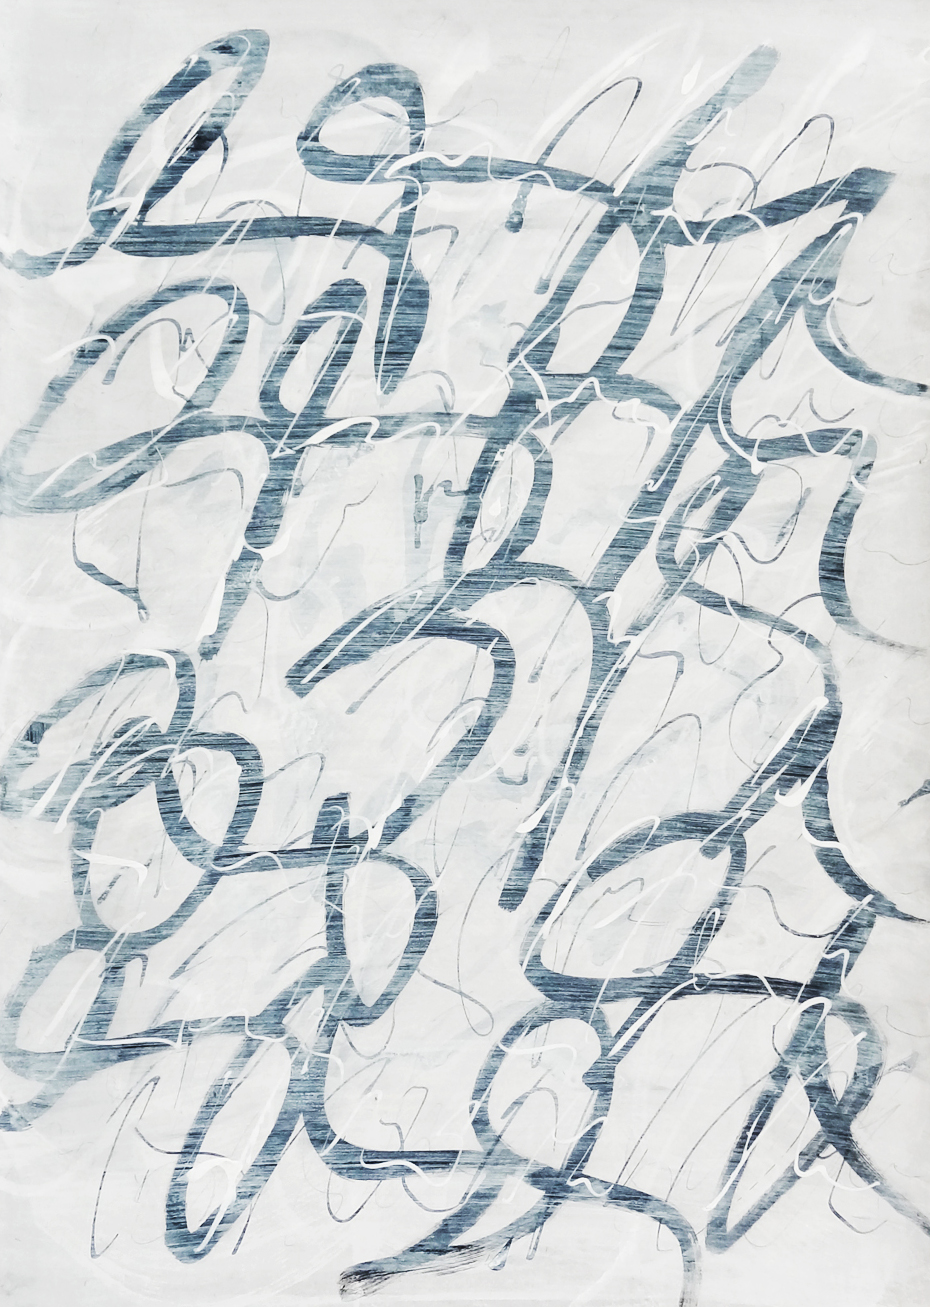  Untitled, 2019 calligraphy ink on paper 42,0 x 29,7 cm (30-19) 